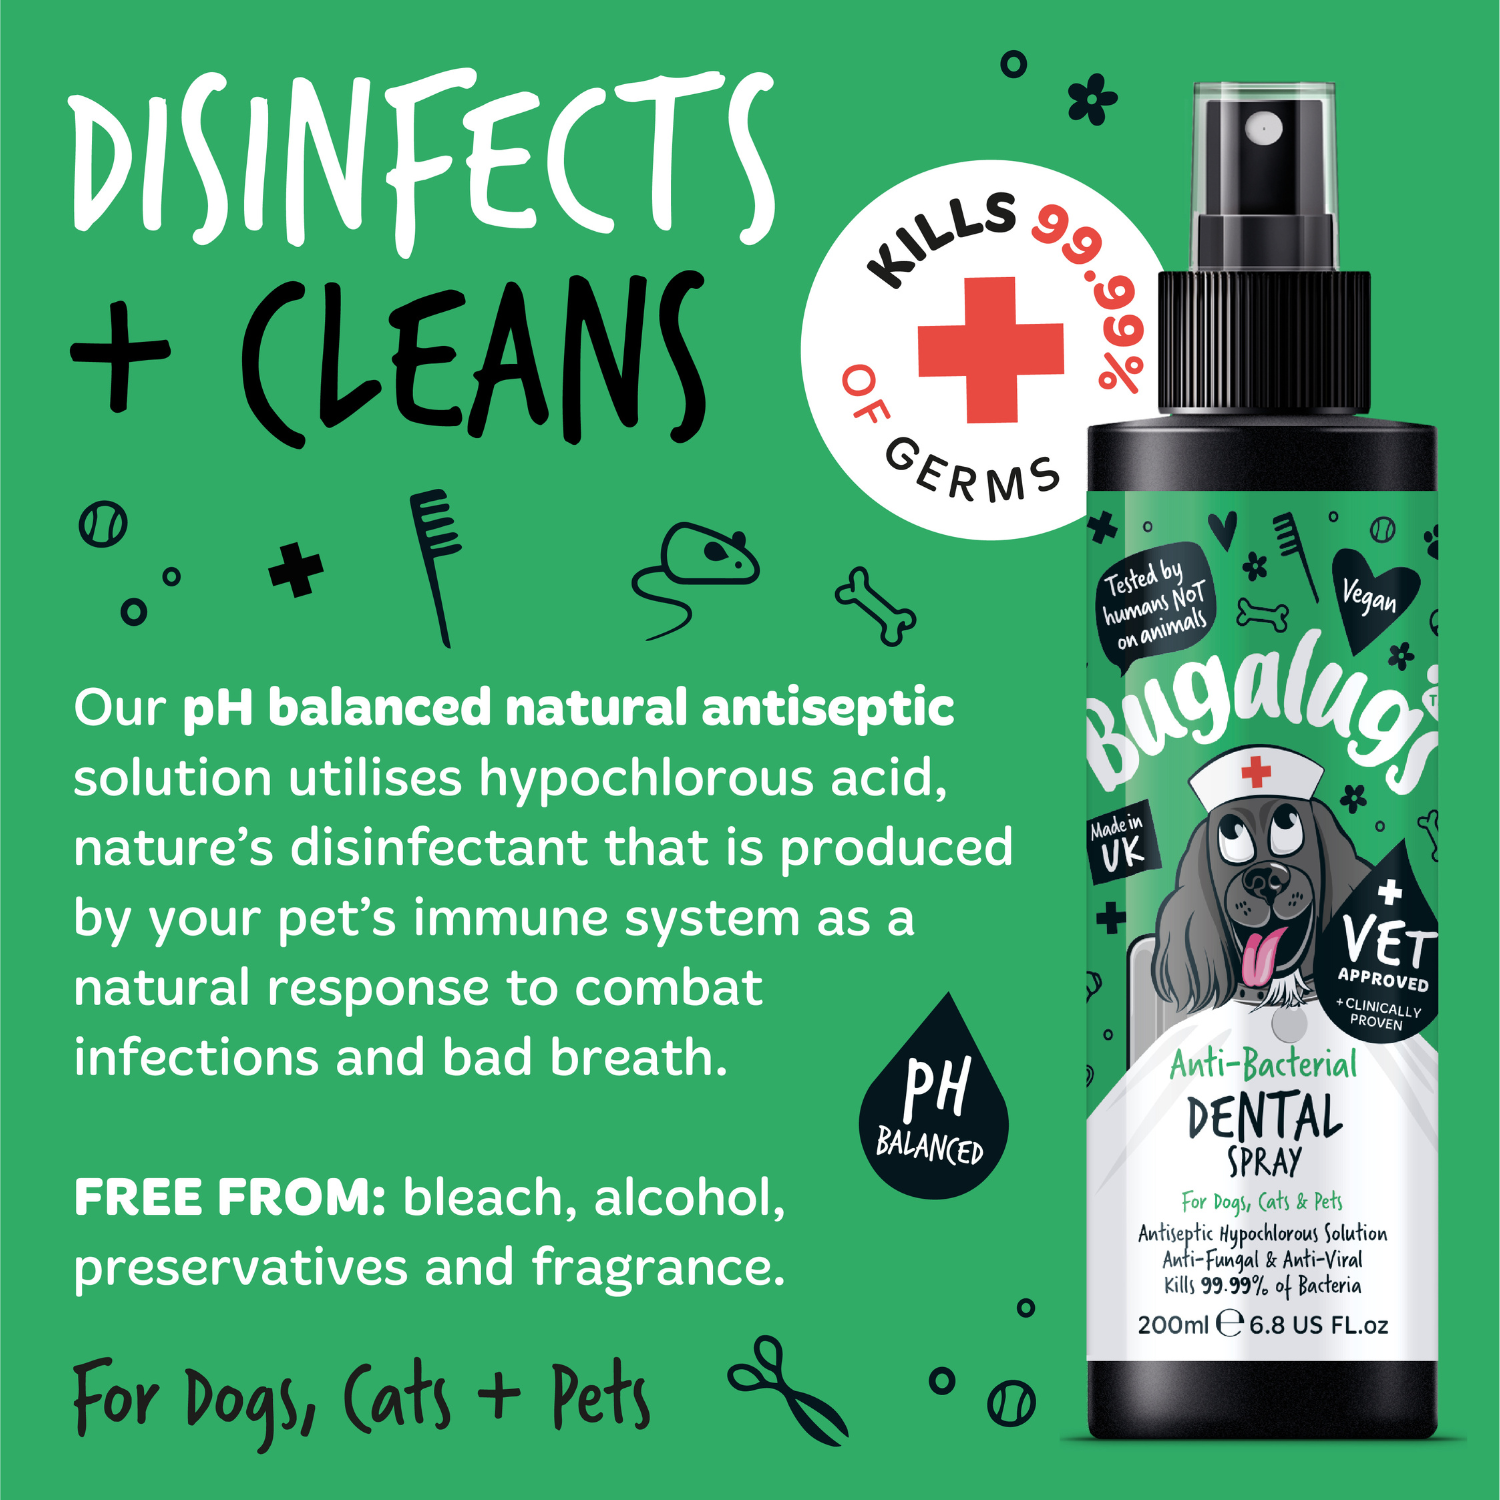 Bugalugs Anti-bacterial Dental Spray for Dogs, Cats and Pets - Disinfects and cleans